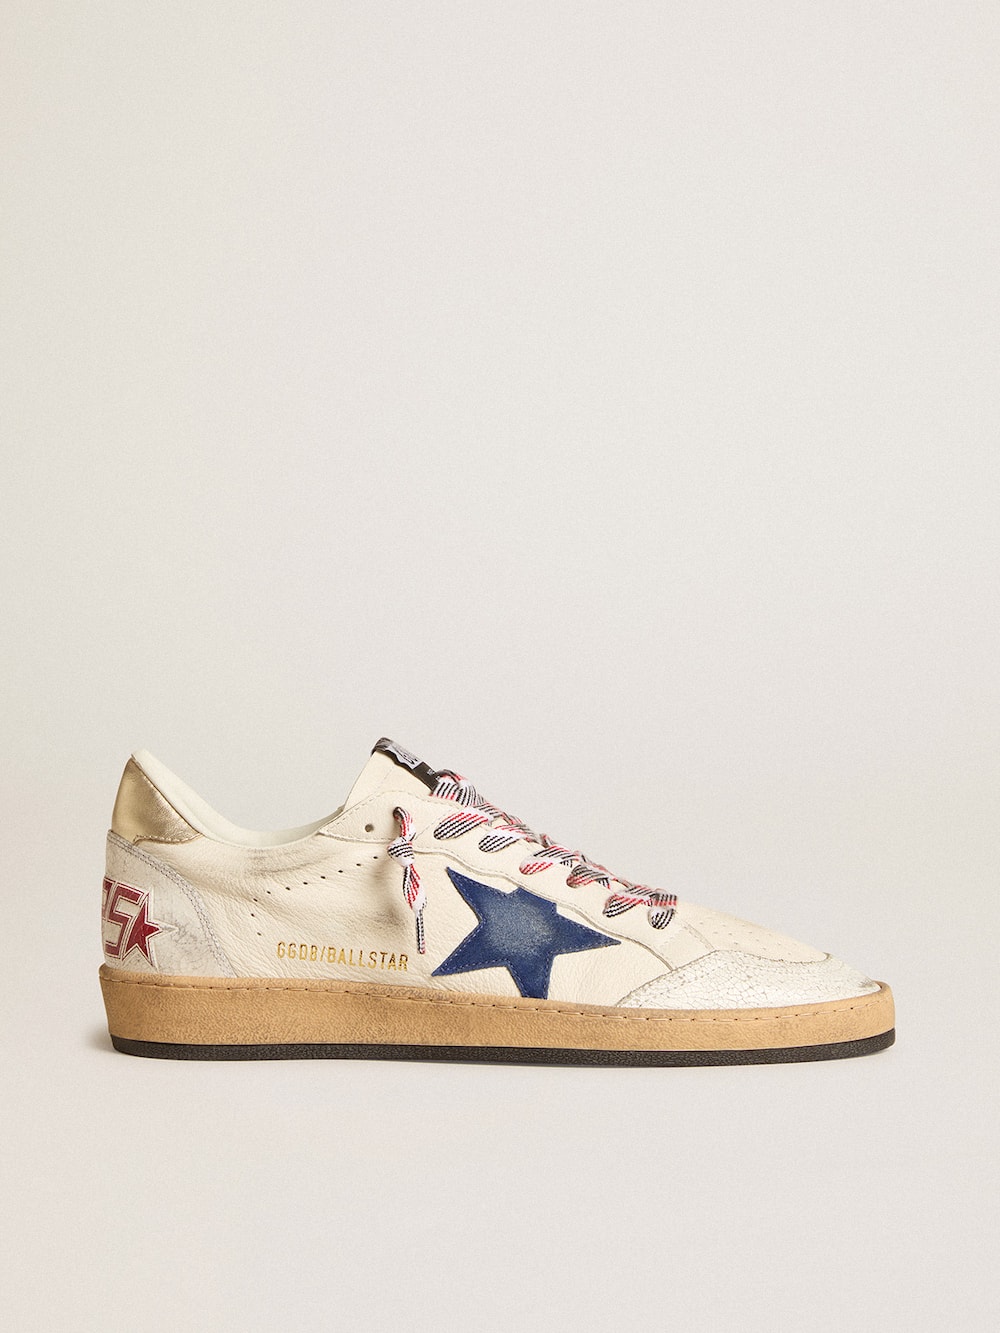 Golden Goose - Men's Ball Star in nappa leather with blue suede star and platinum leather heel tab in 